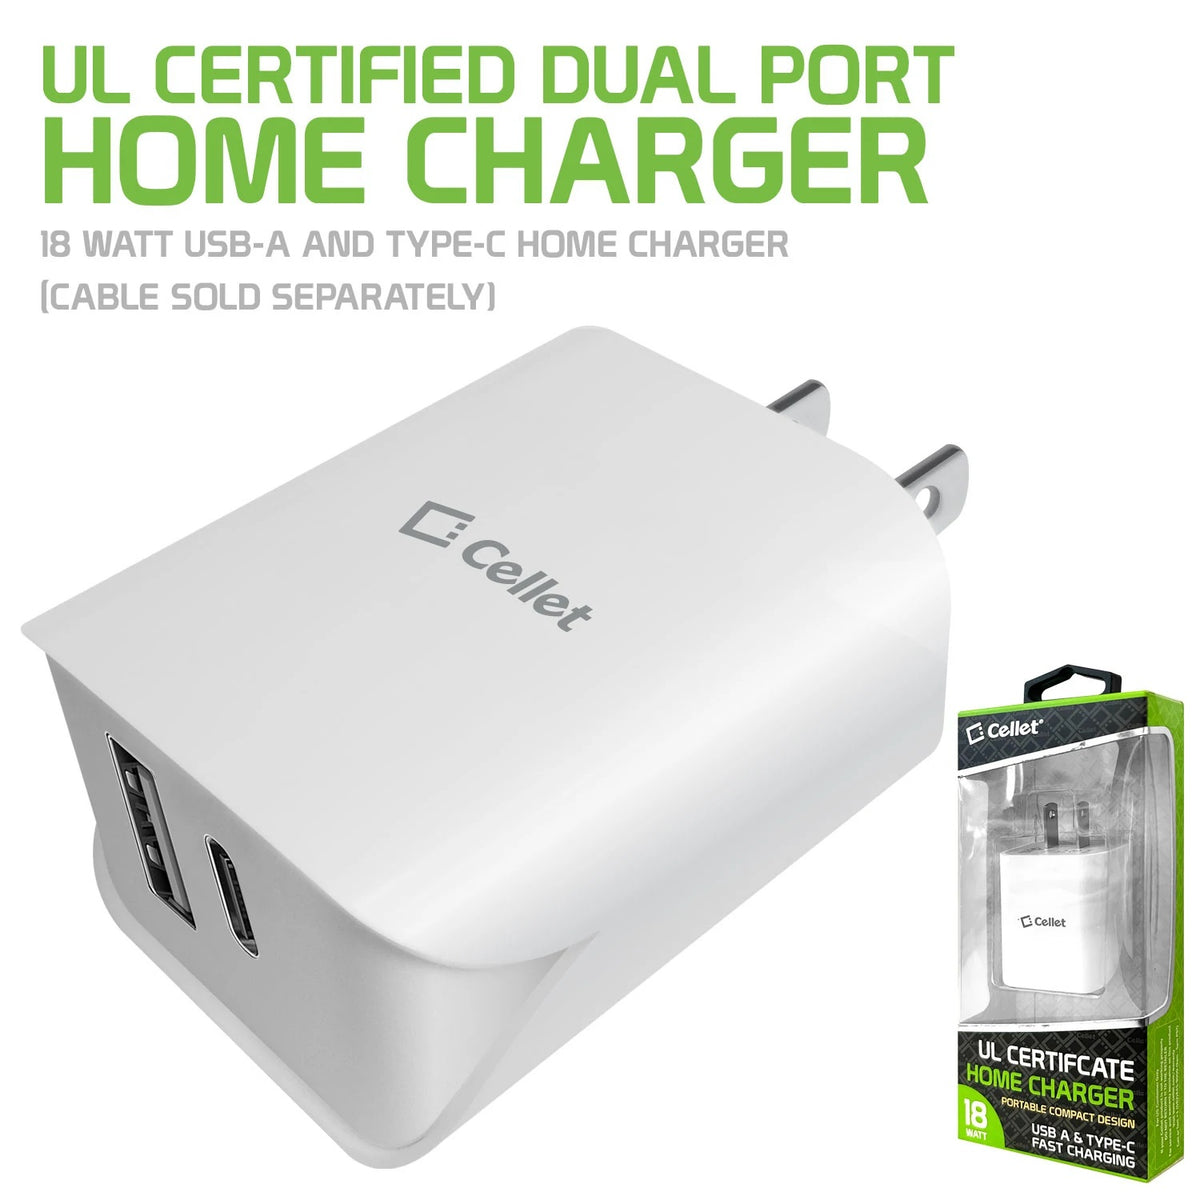 Cellet UL Certified Dual Port Home Charger, White